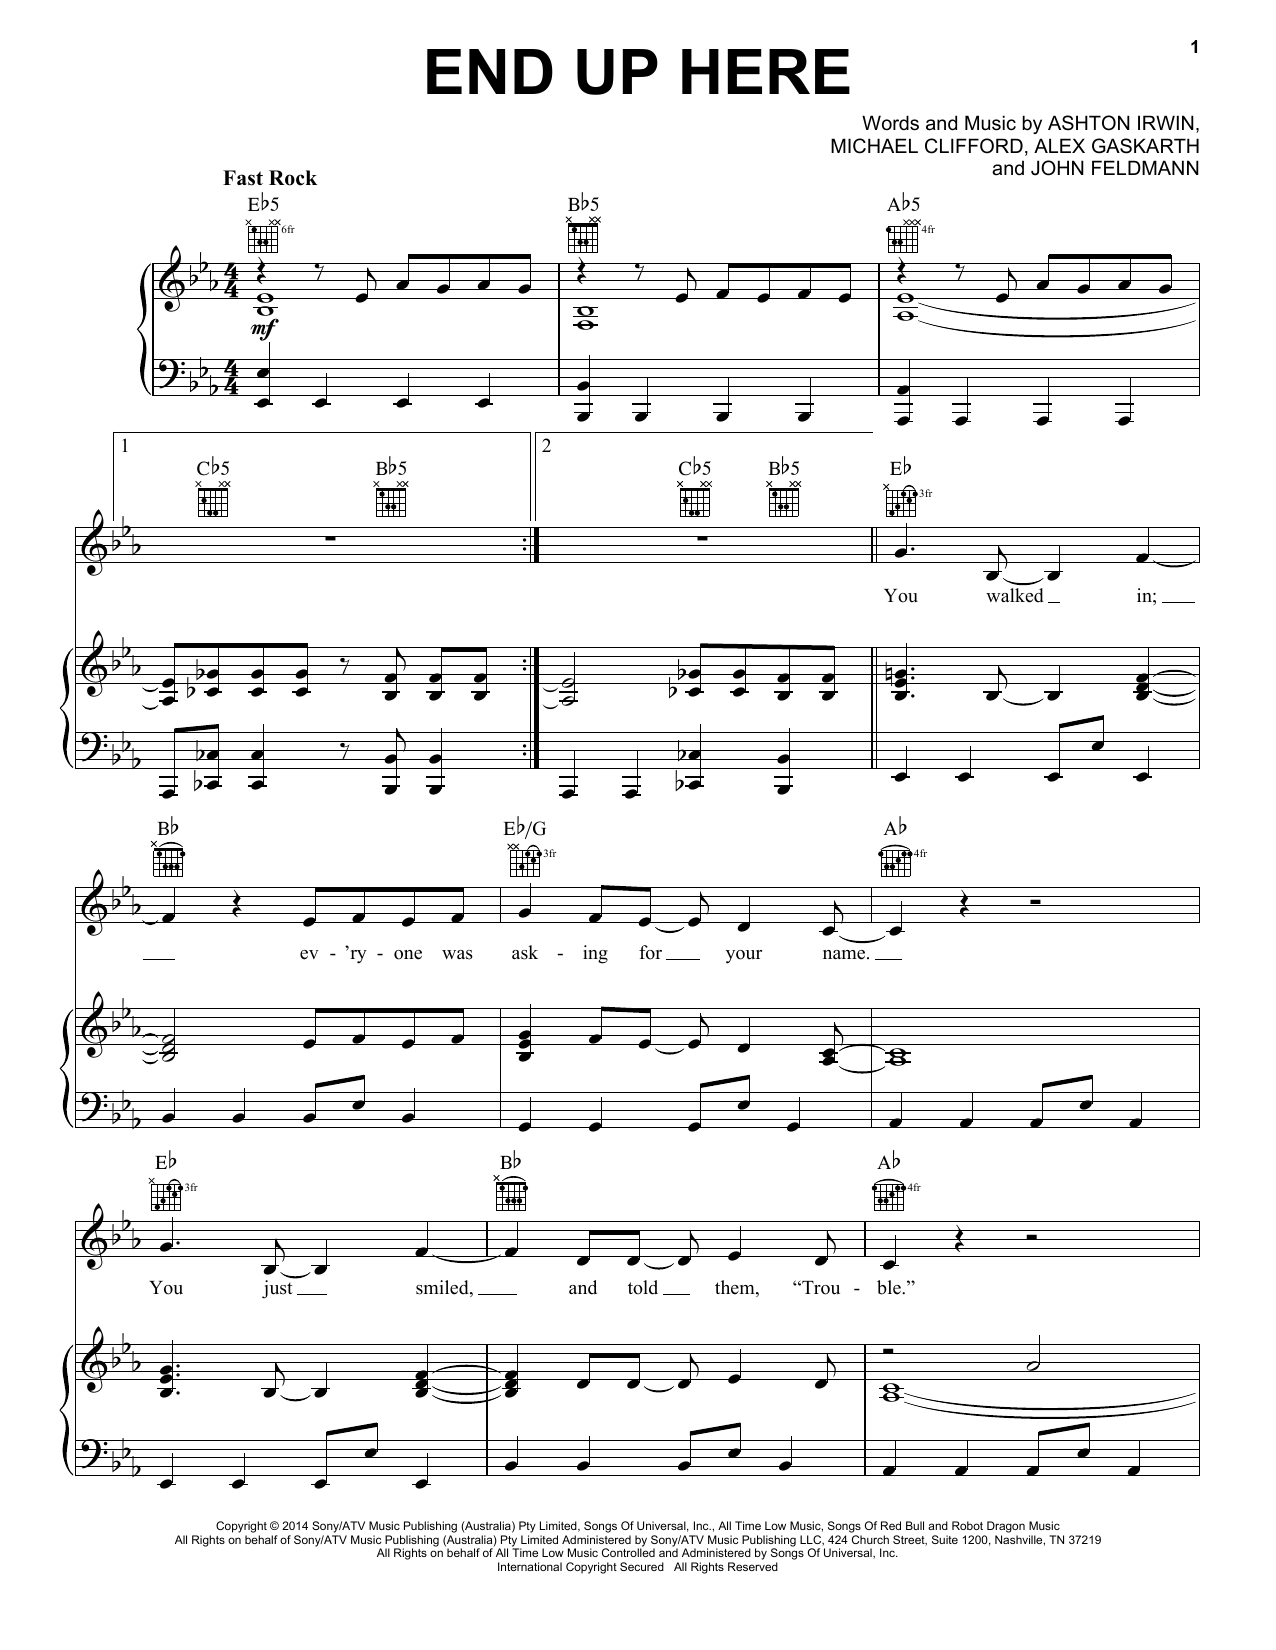 Download 5 Seconds of Summer End Up Here Sheet Music